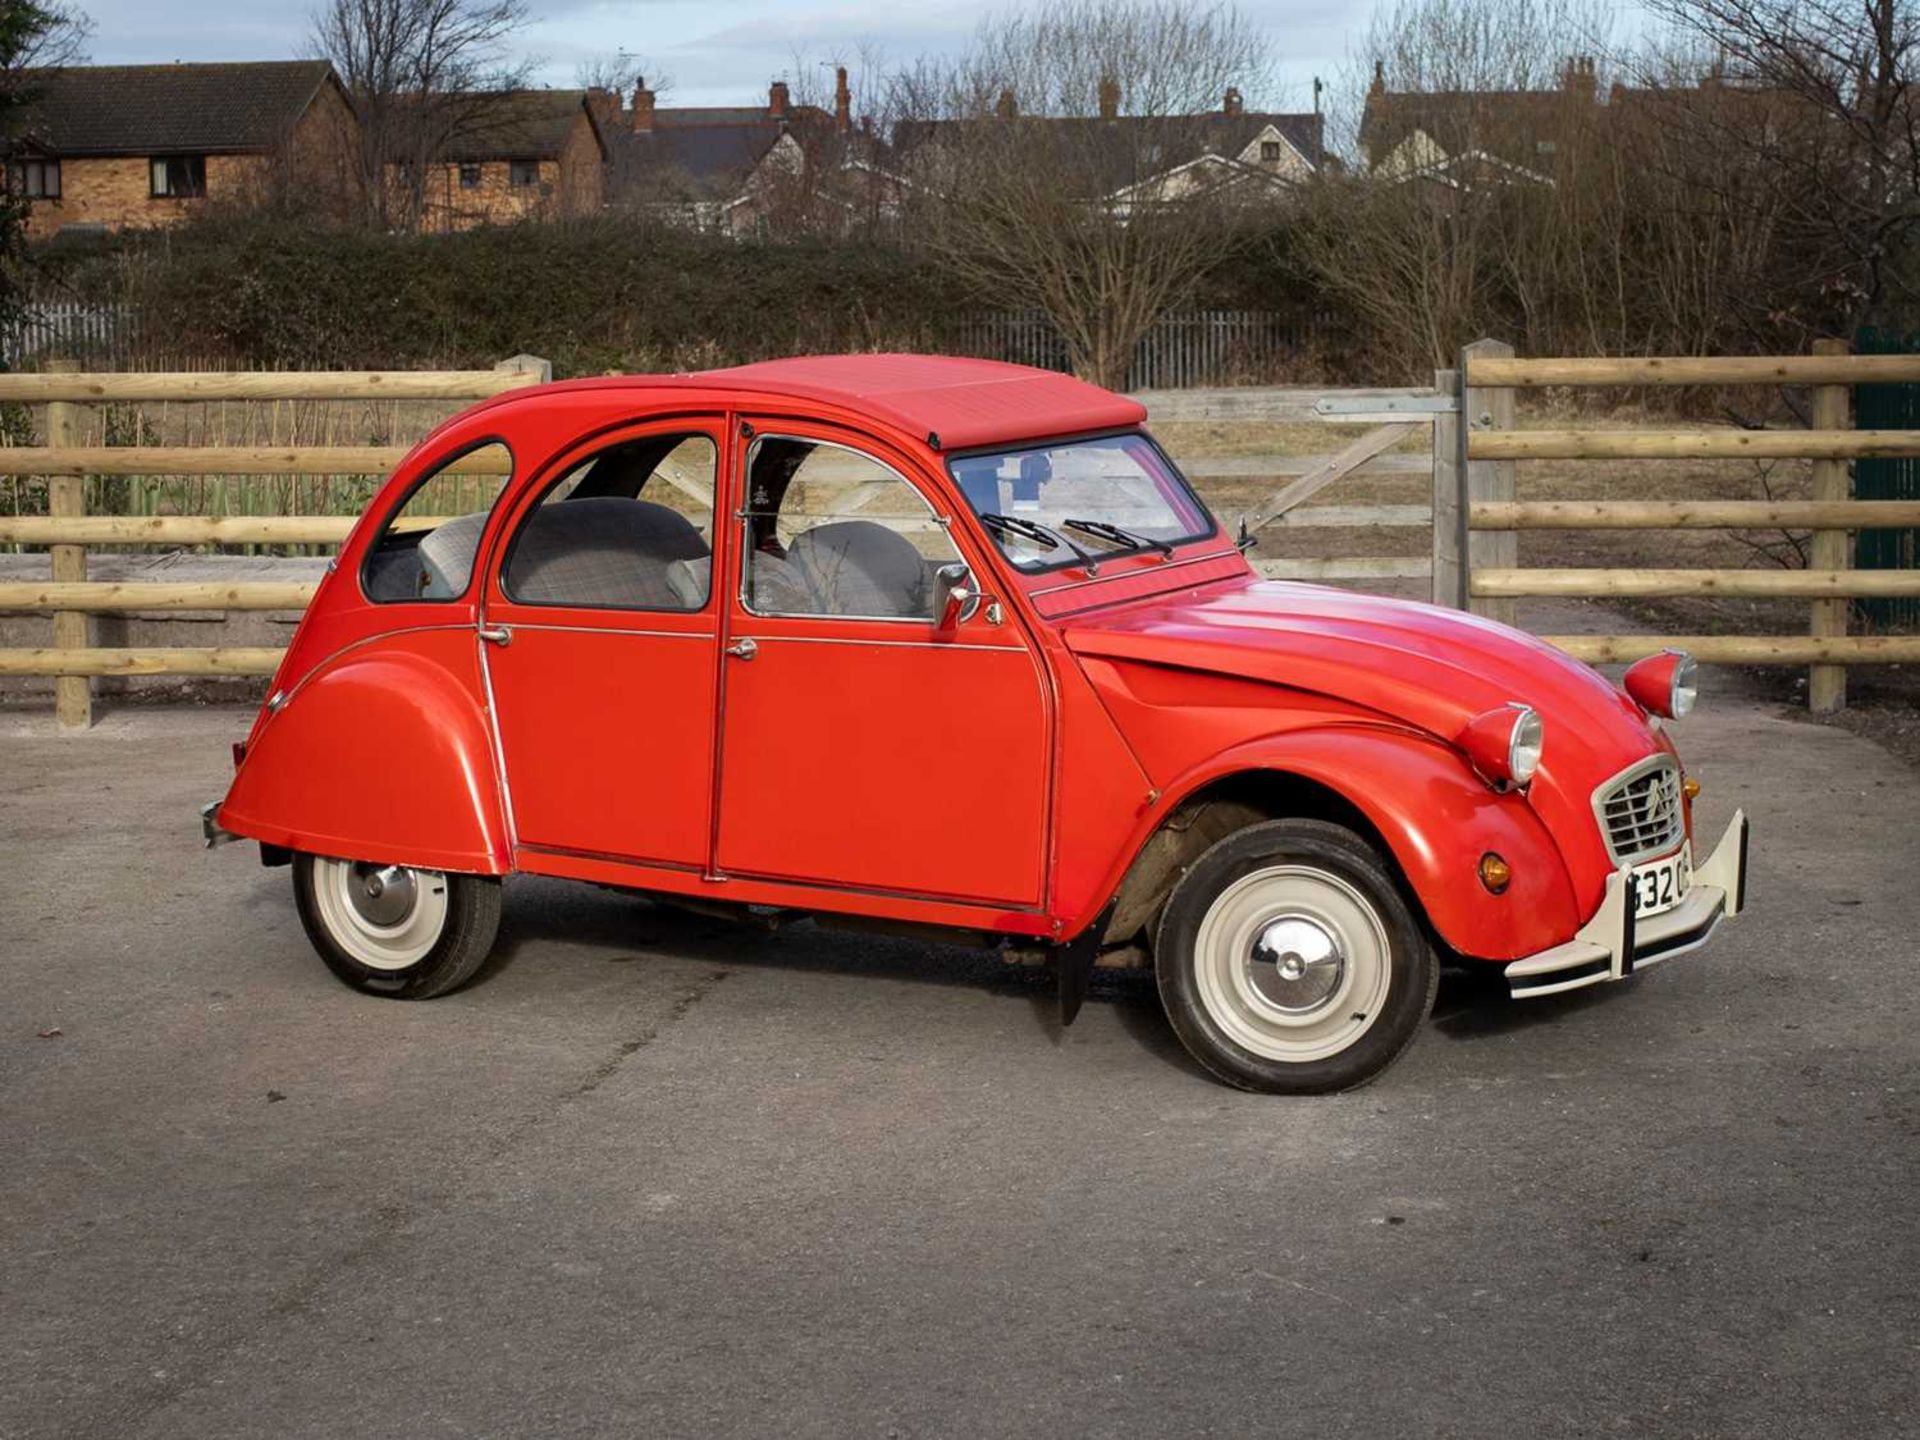 1989 Citroën 2CV6 Spécial Believed to have covered a credible 15,000 miles - Image 29 of 113